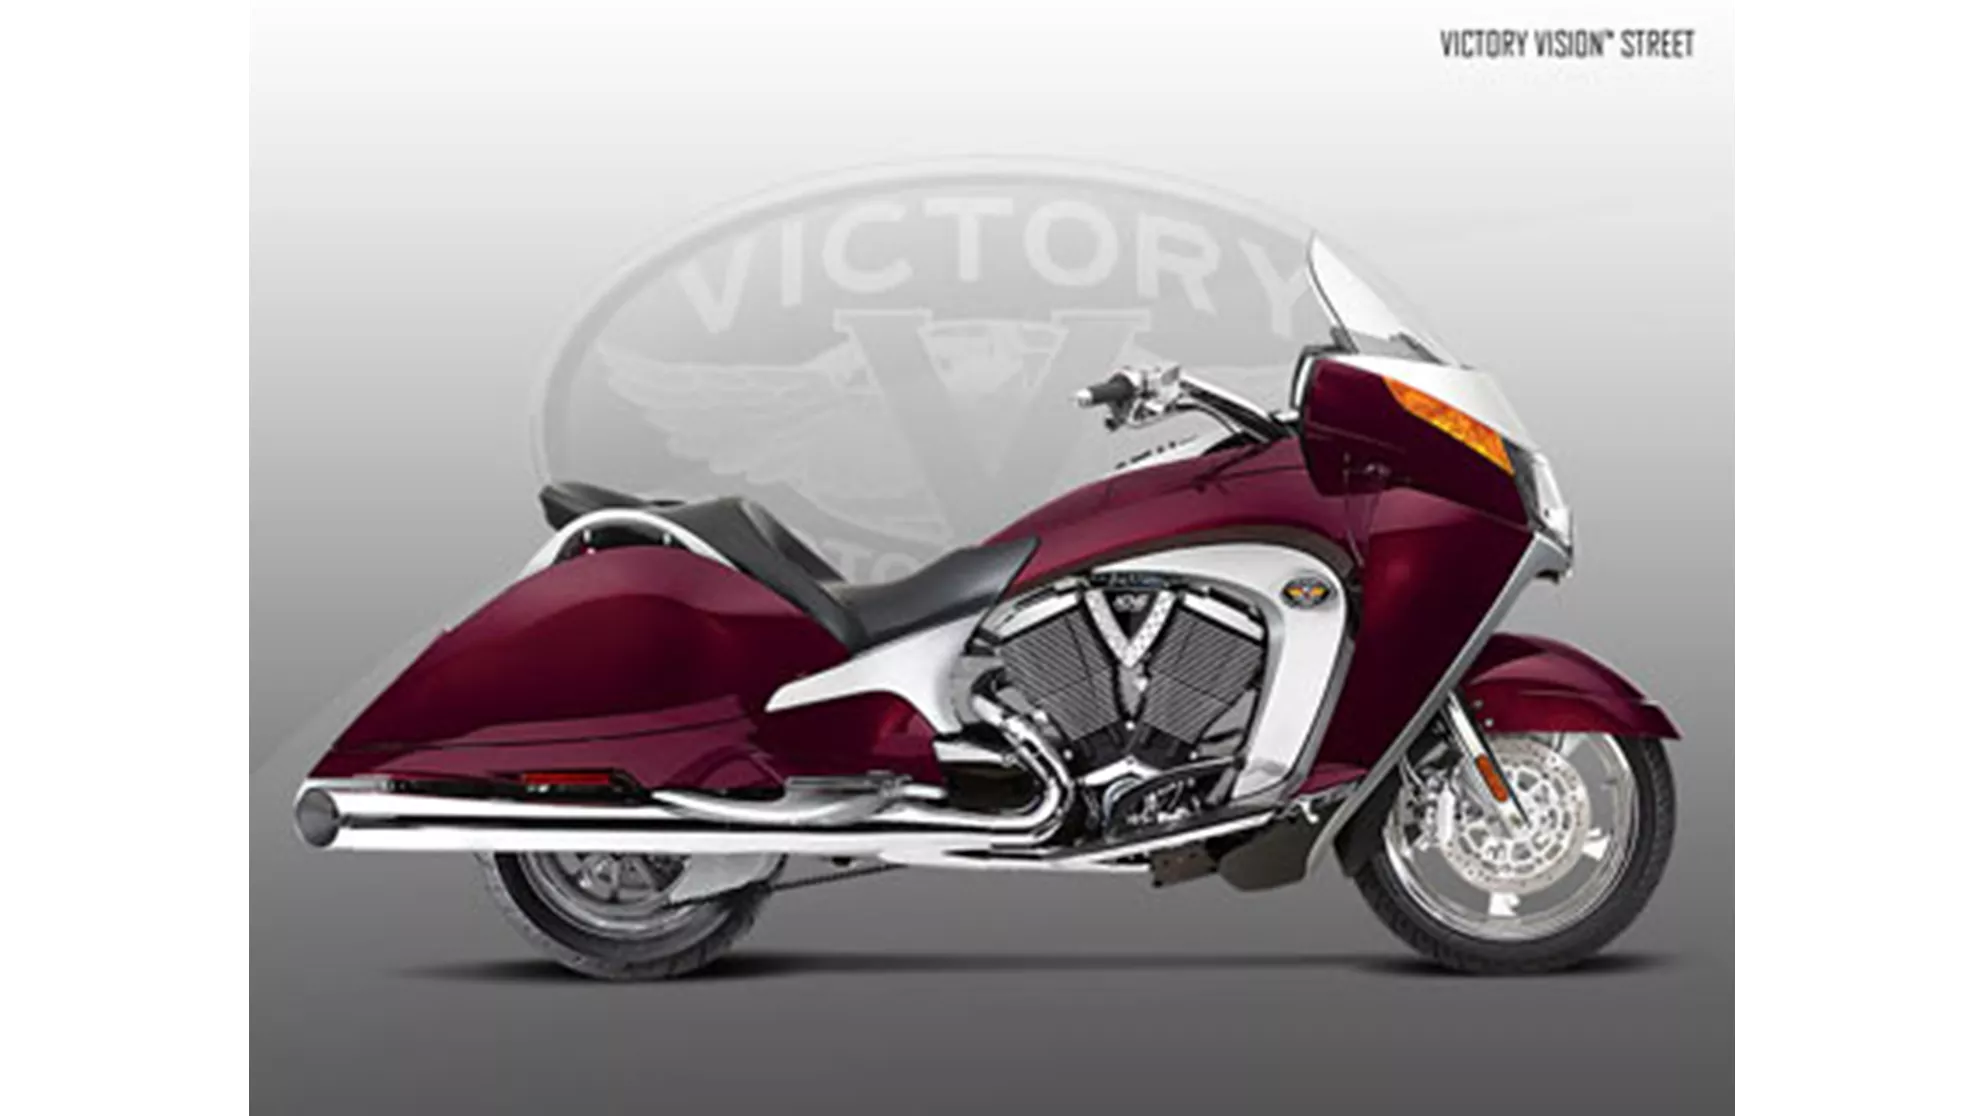 Victory Vision Street - Immagine 1